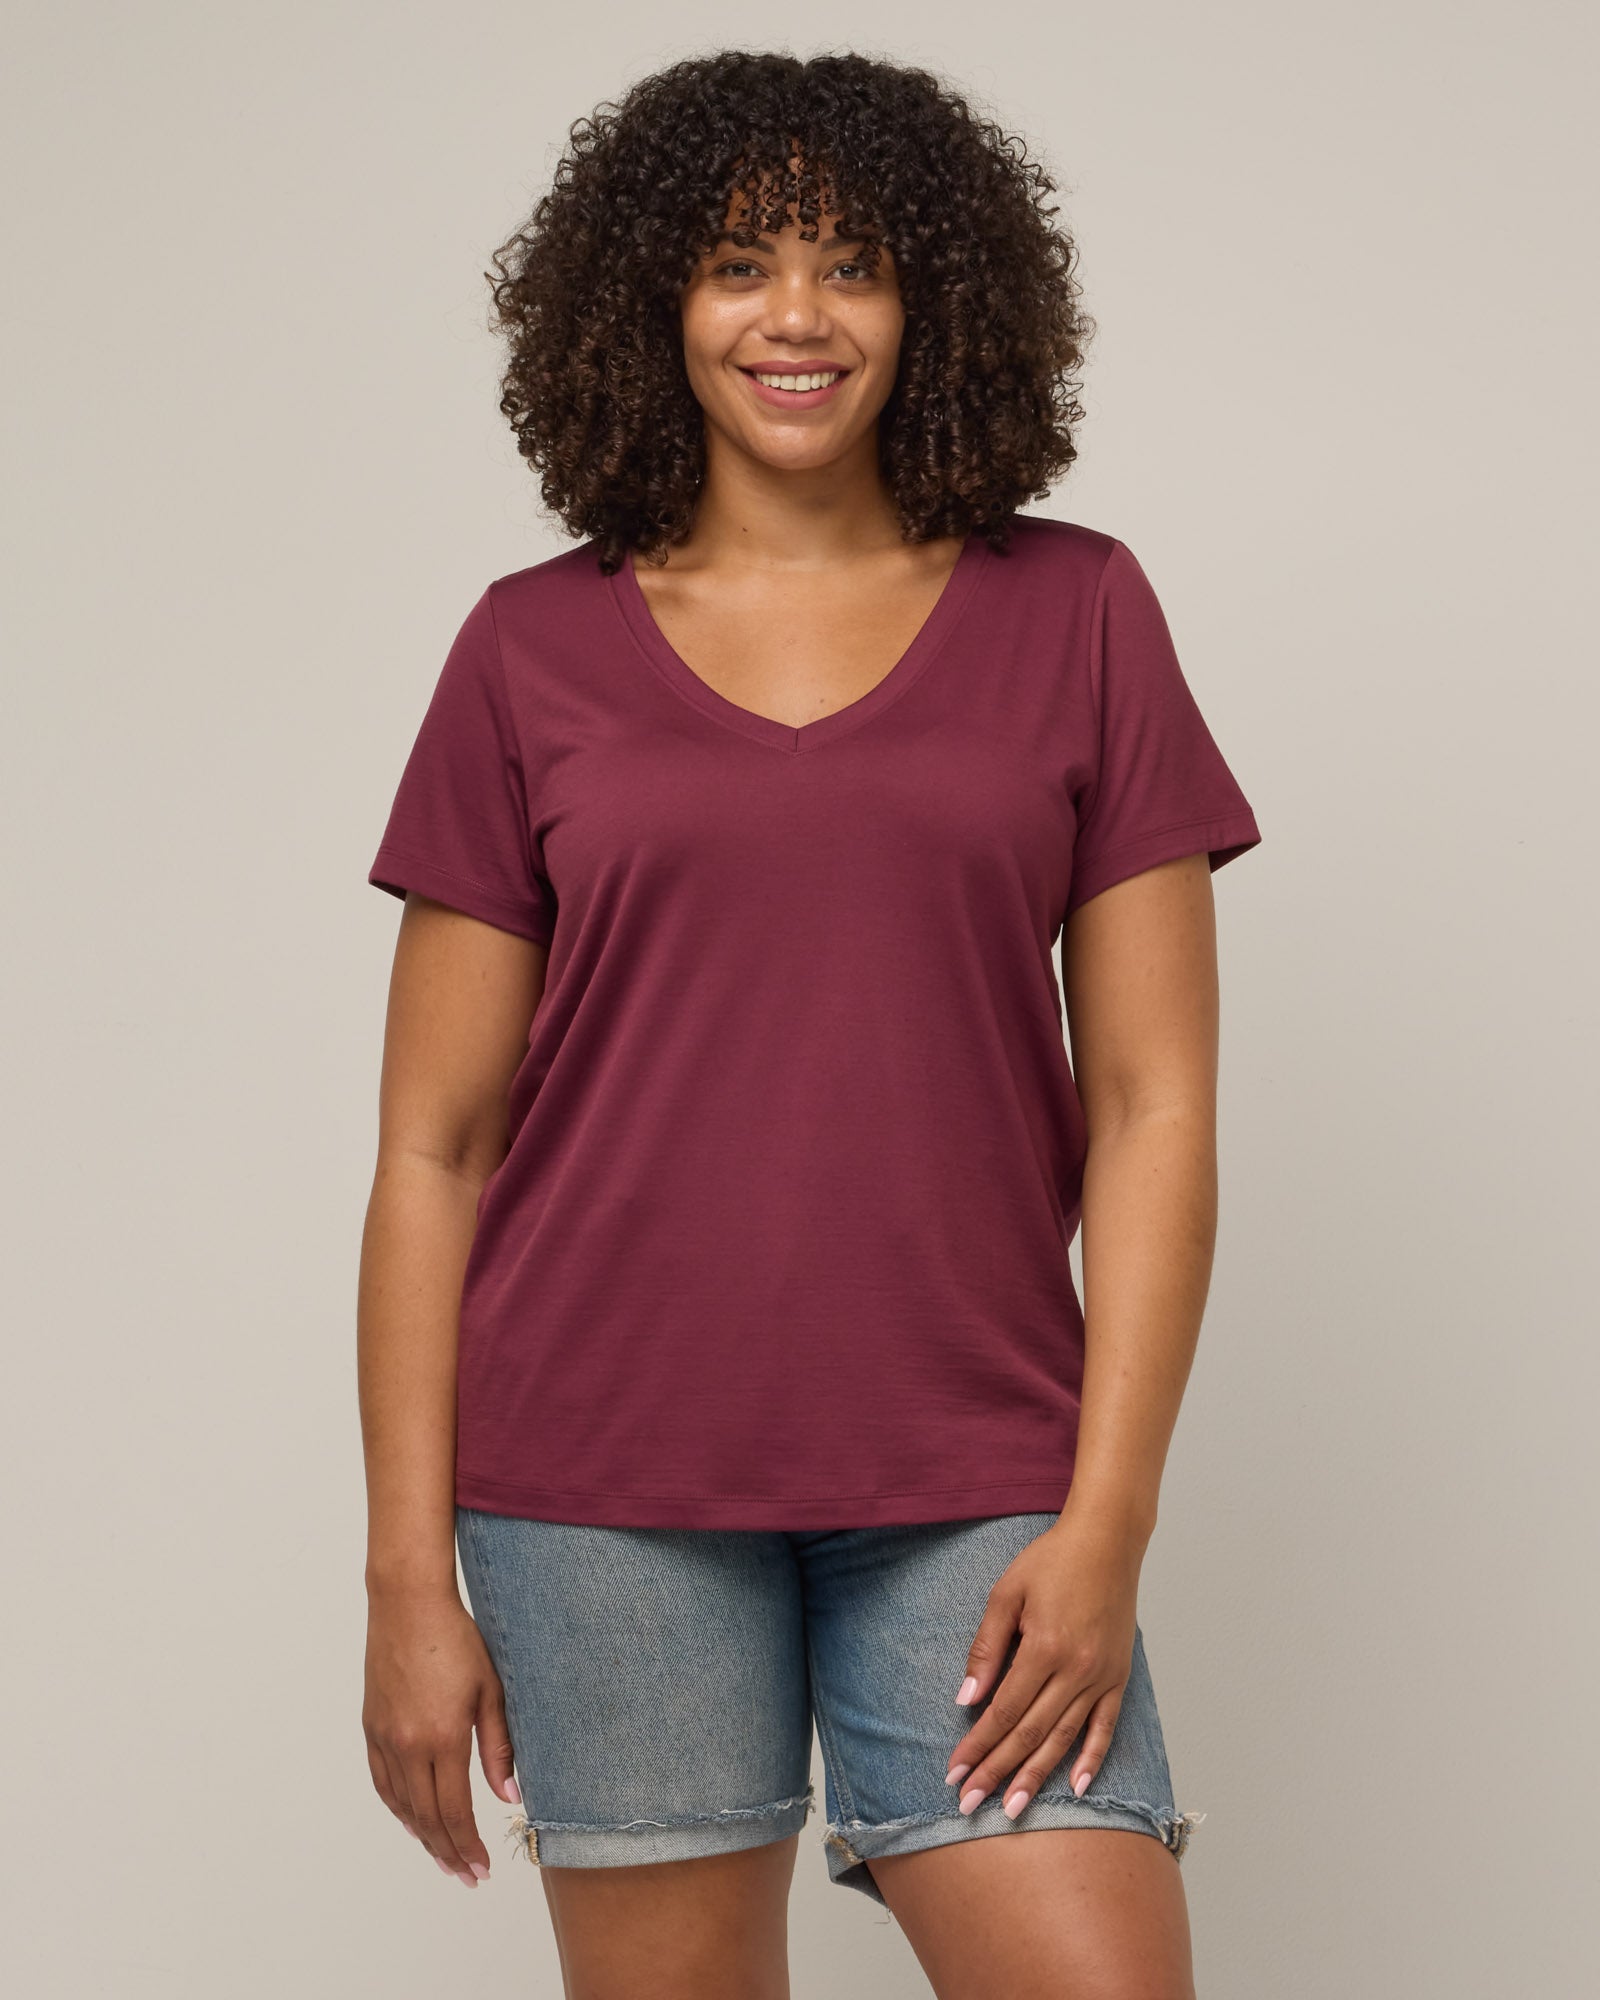 Fitted wool or cotton tee shirt for women